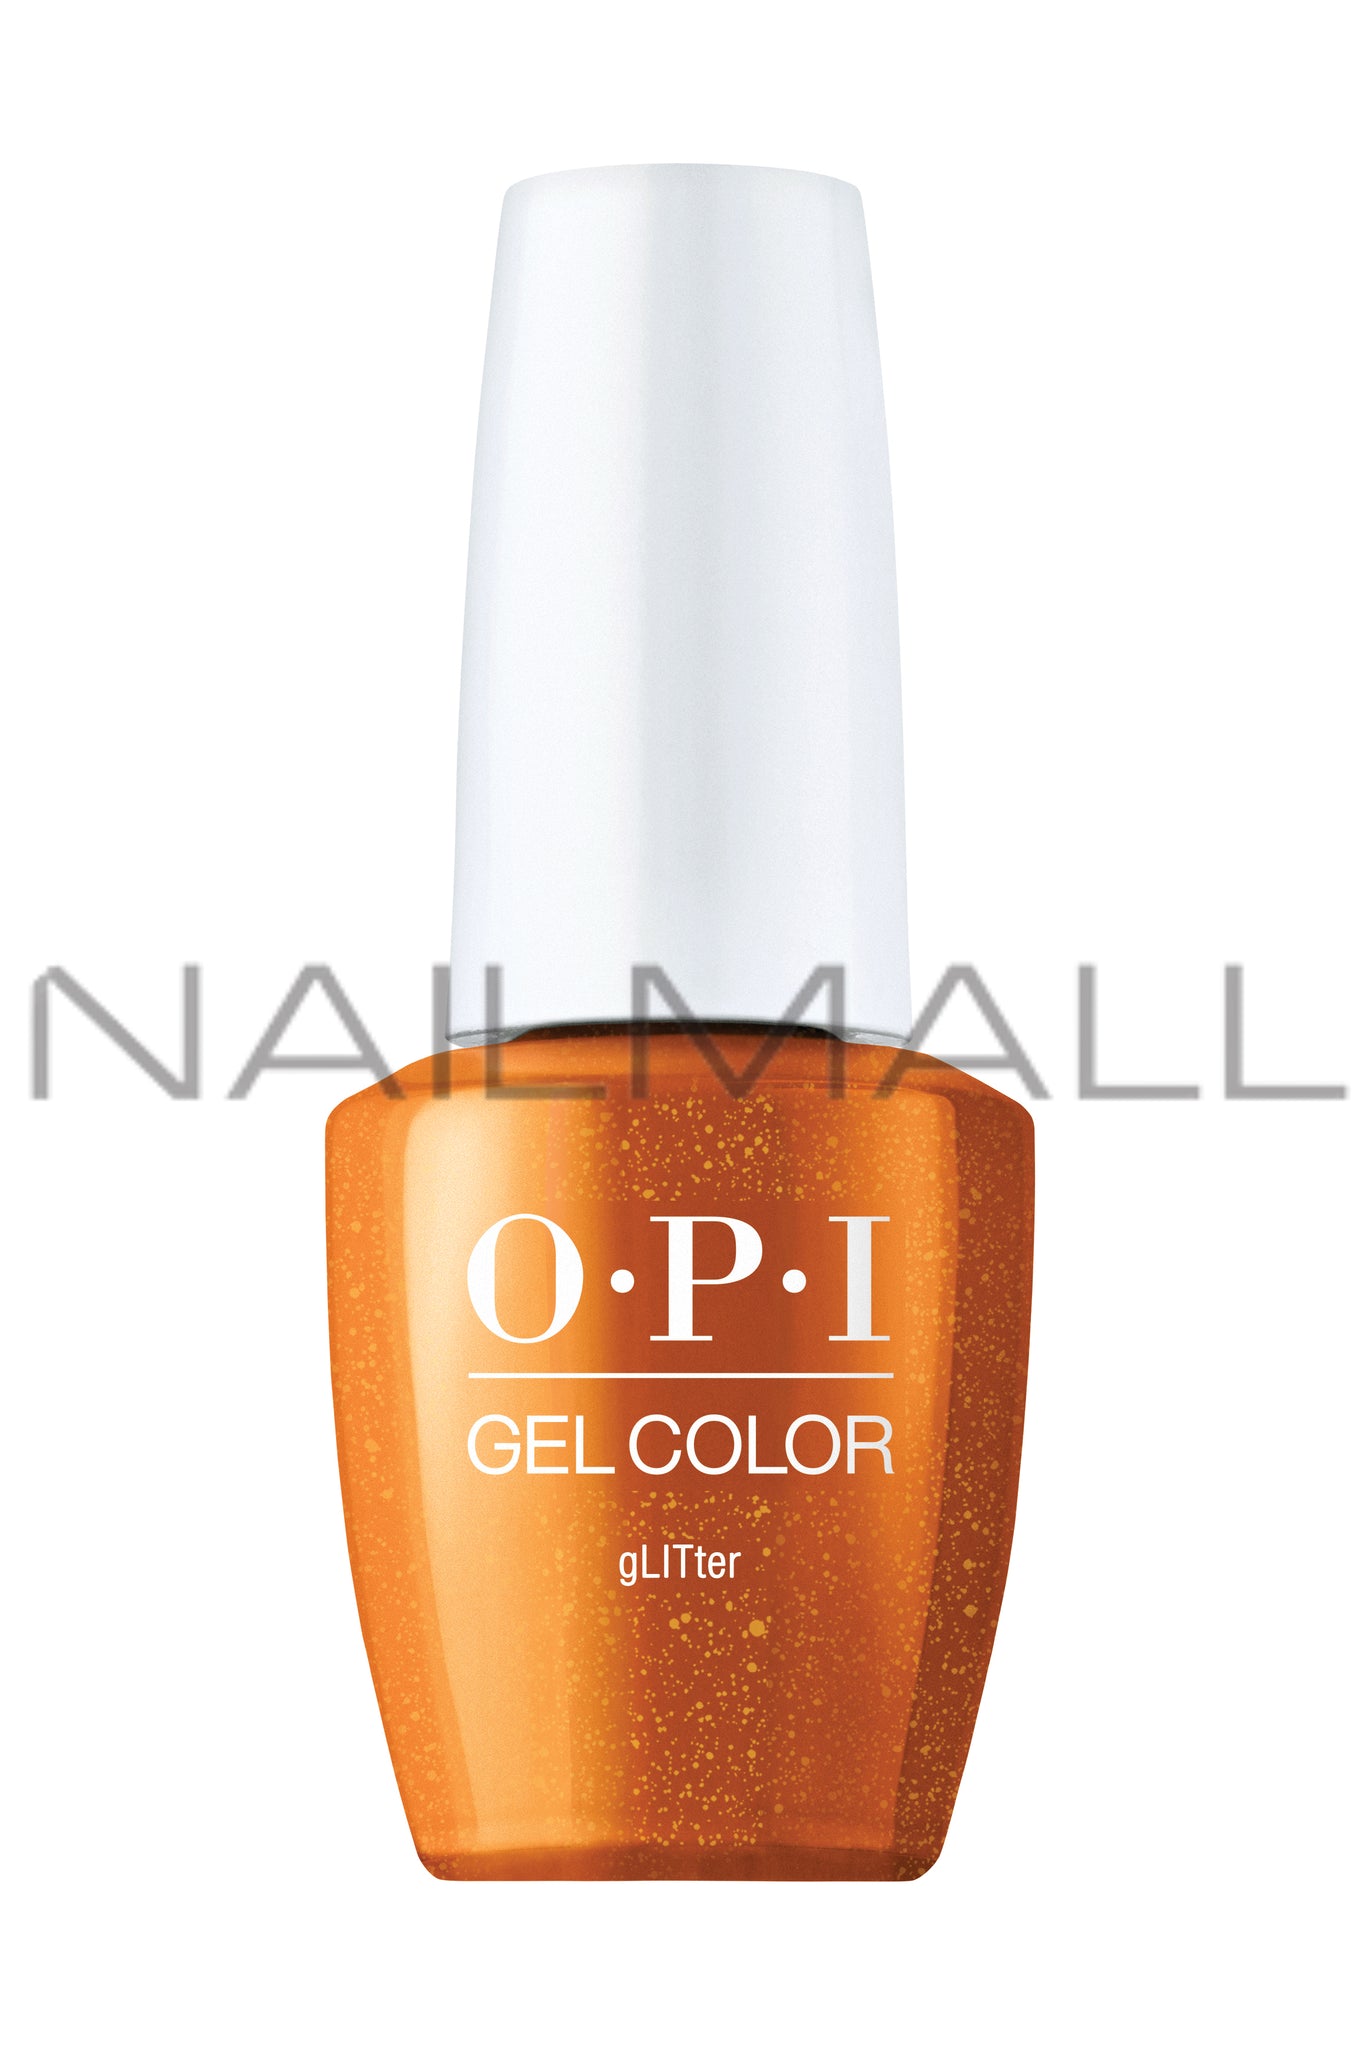 OPI Matching Gelcolor and Nail Polish - S015	gLITter